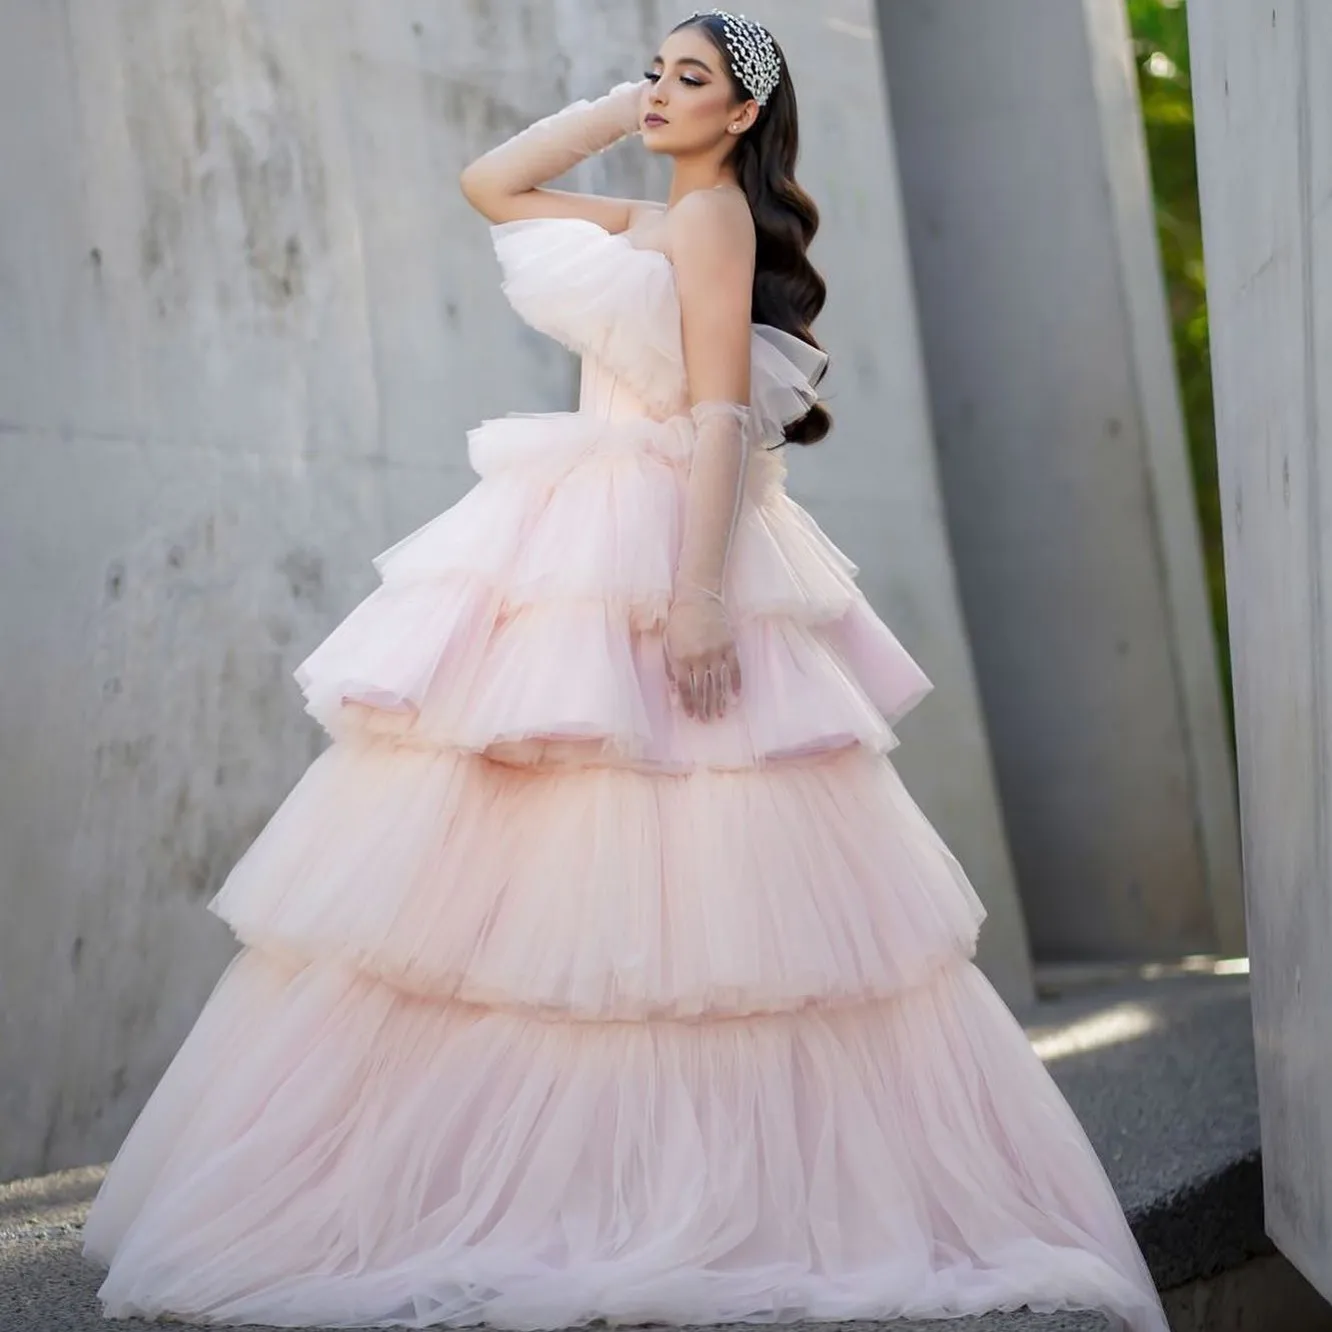 

Light Pink Lush Layered Tulle Long Gowns To Party Pretty A-line Tutu Tulle Bridal Dresses Lace Up Back Women Maxi Dress